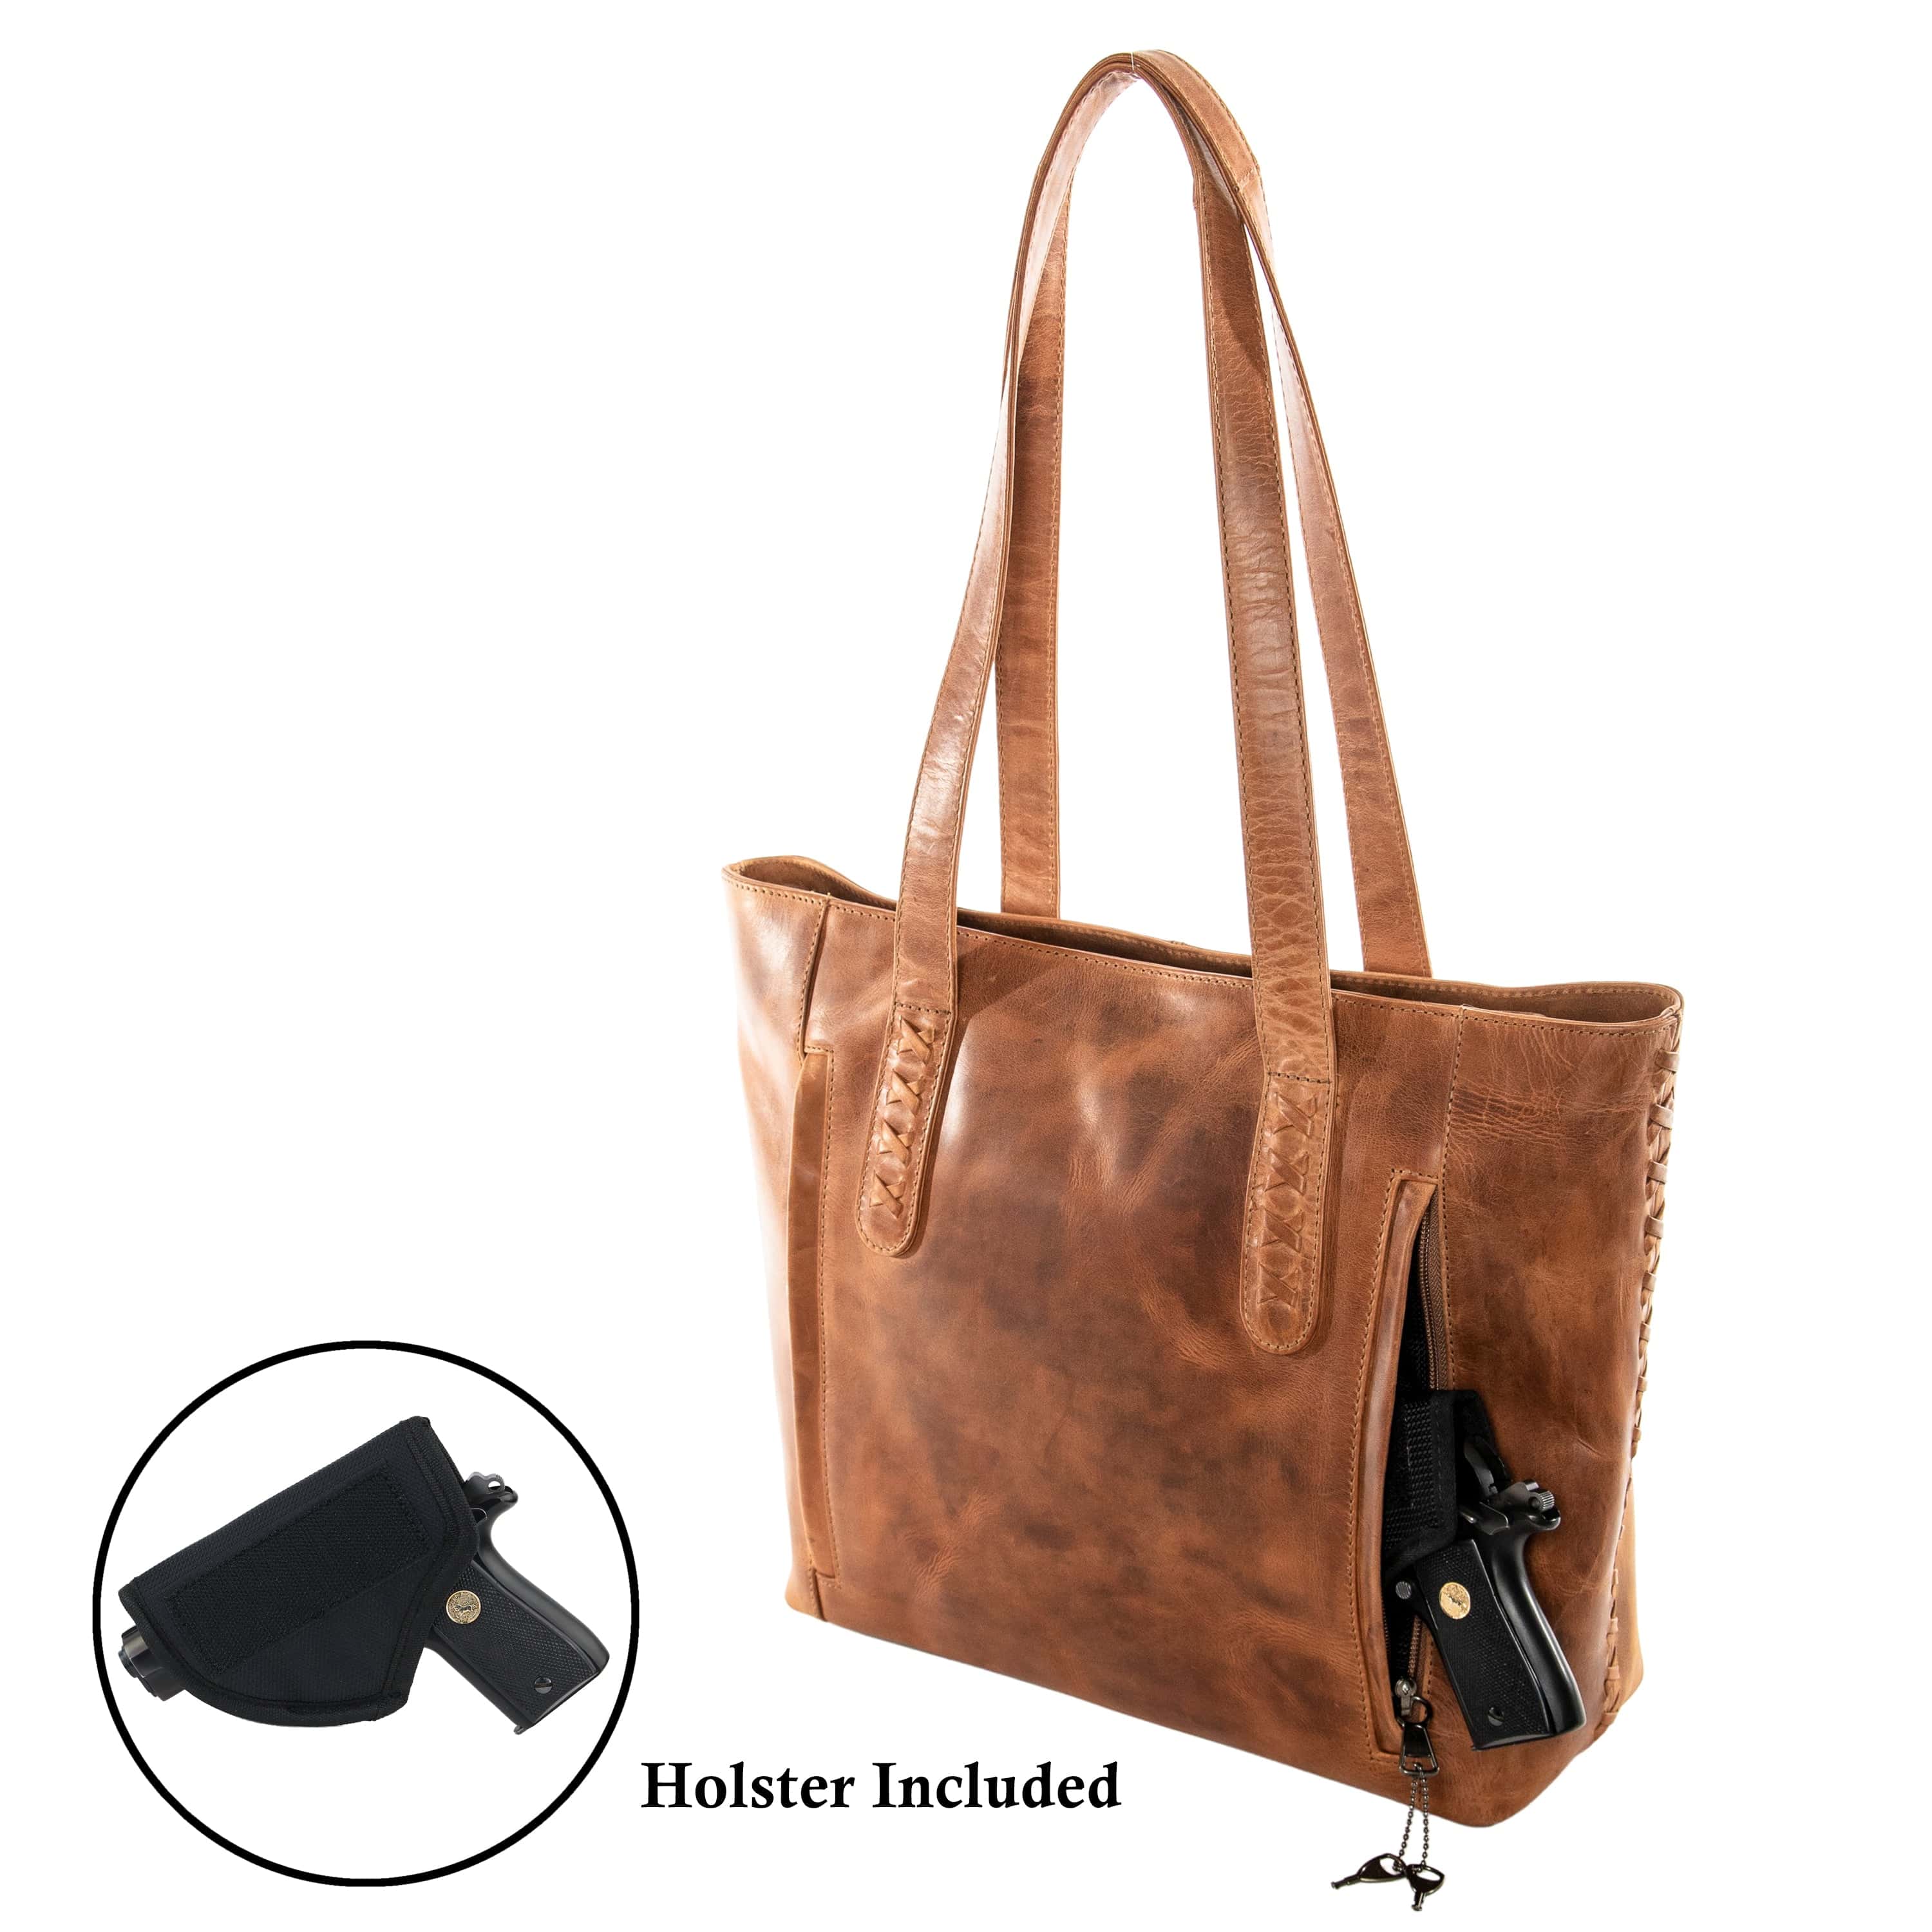 Concealed Carry Norah Large Leather Tote -  Lady Conceal -  Concealed Carry Purse -  Women Pistol Bag -  YKK Locking -  Gun Security Purse -  designer purse brands -  designer backpack purse -  designer purse sale -  womens designer purse sale -  designer purses black friday sale -  black and white designer purse -  black crossbody purse designer -  black owned purse designers -  woman designer purse -  designer purses for women 